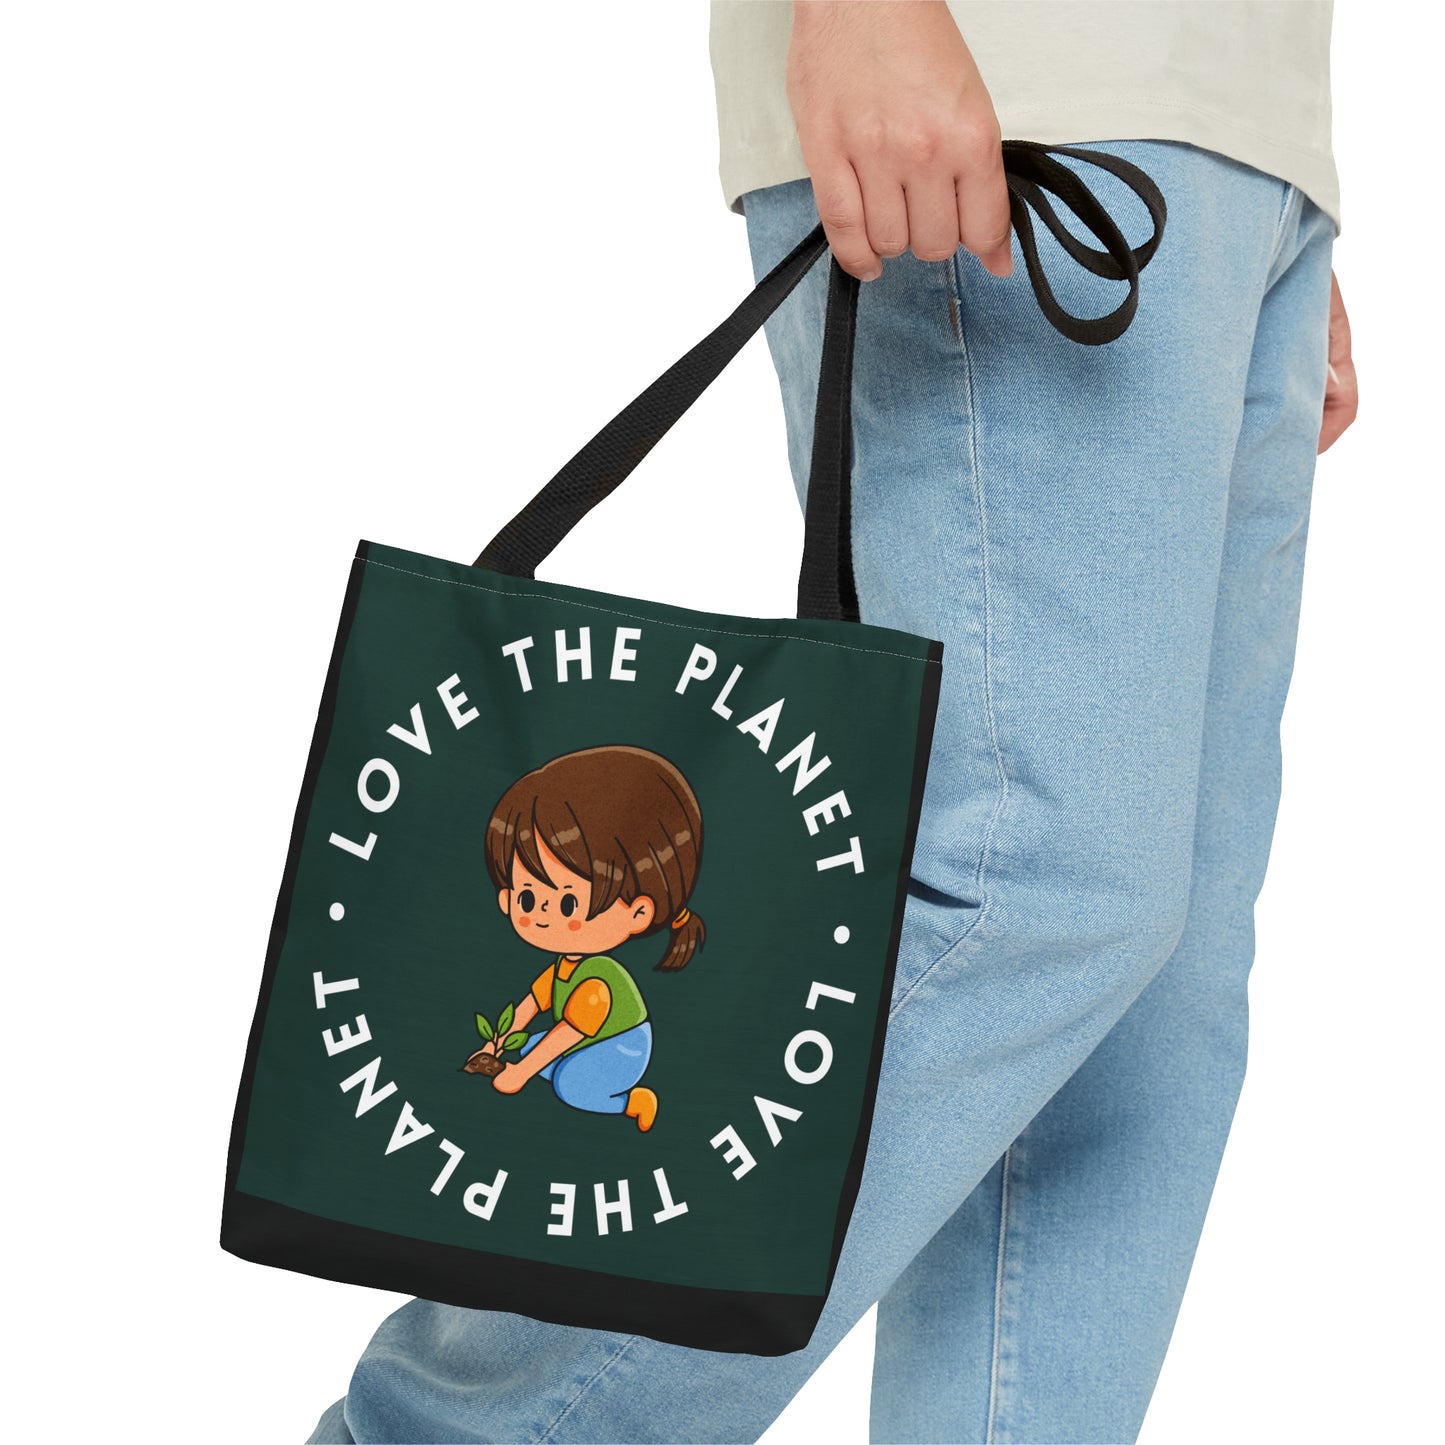 Caring kid planting a tree inside a  “LOVE THE PLANET” Tote Bag in 3 sizes to meet your needs. Available in black.